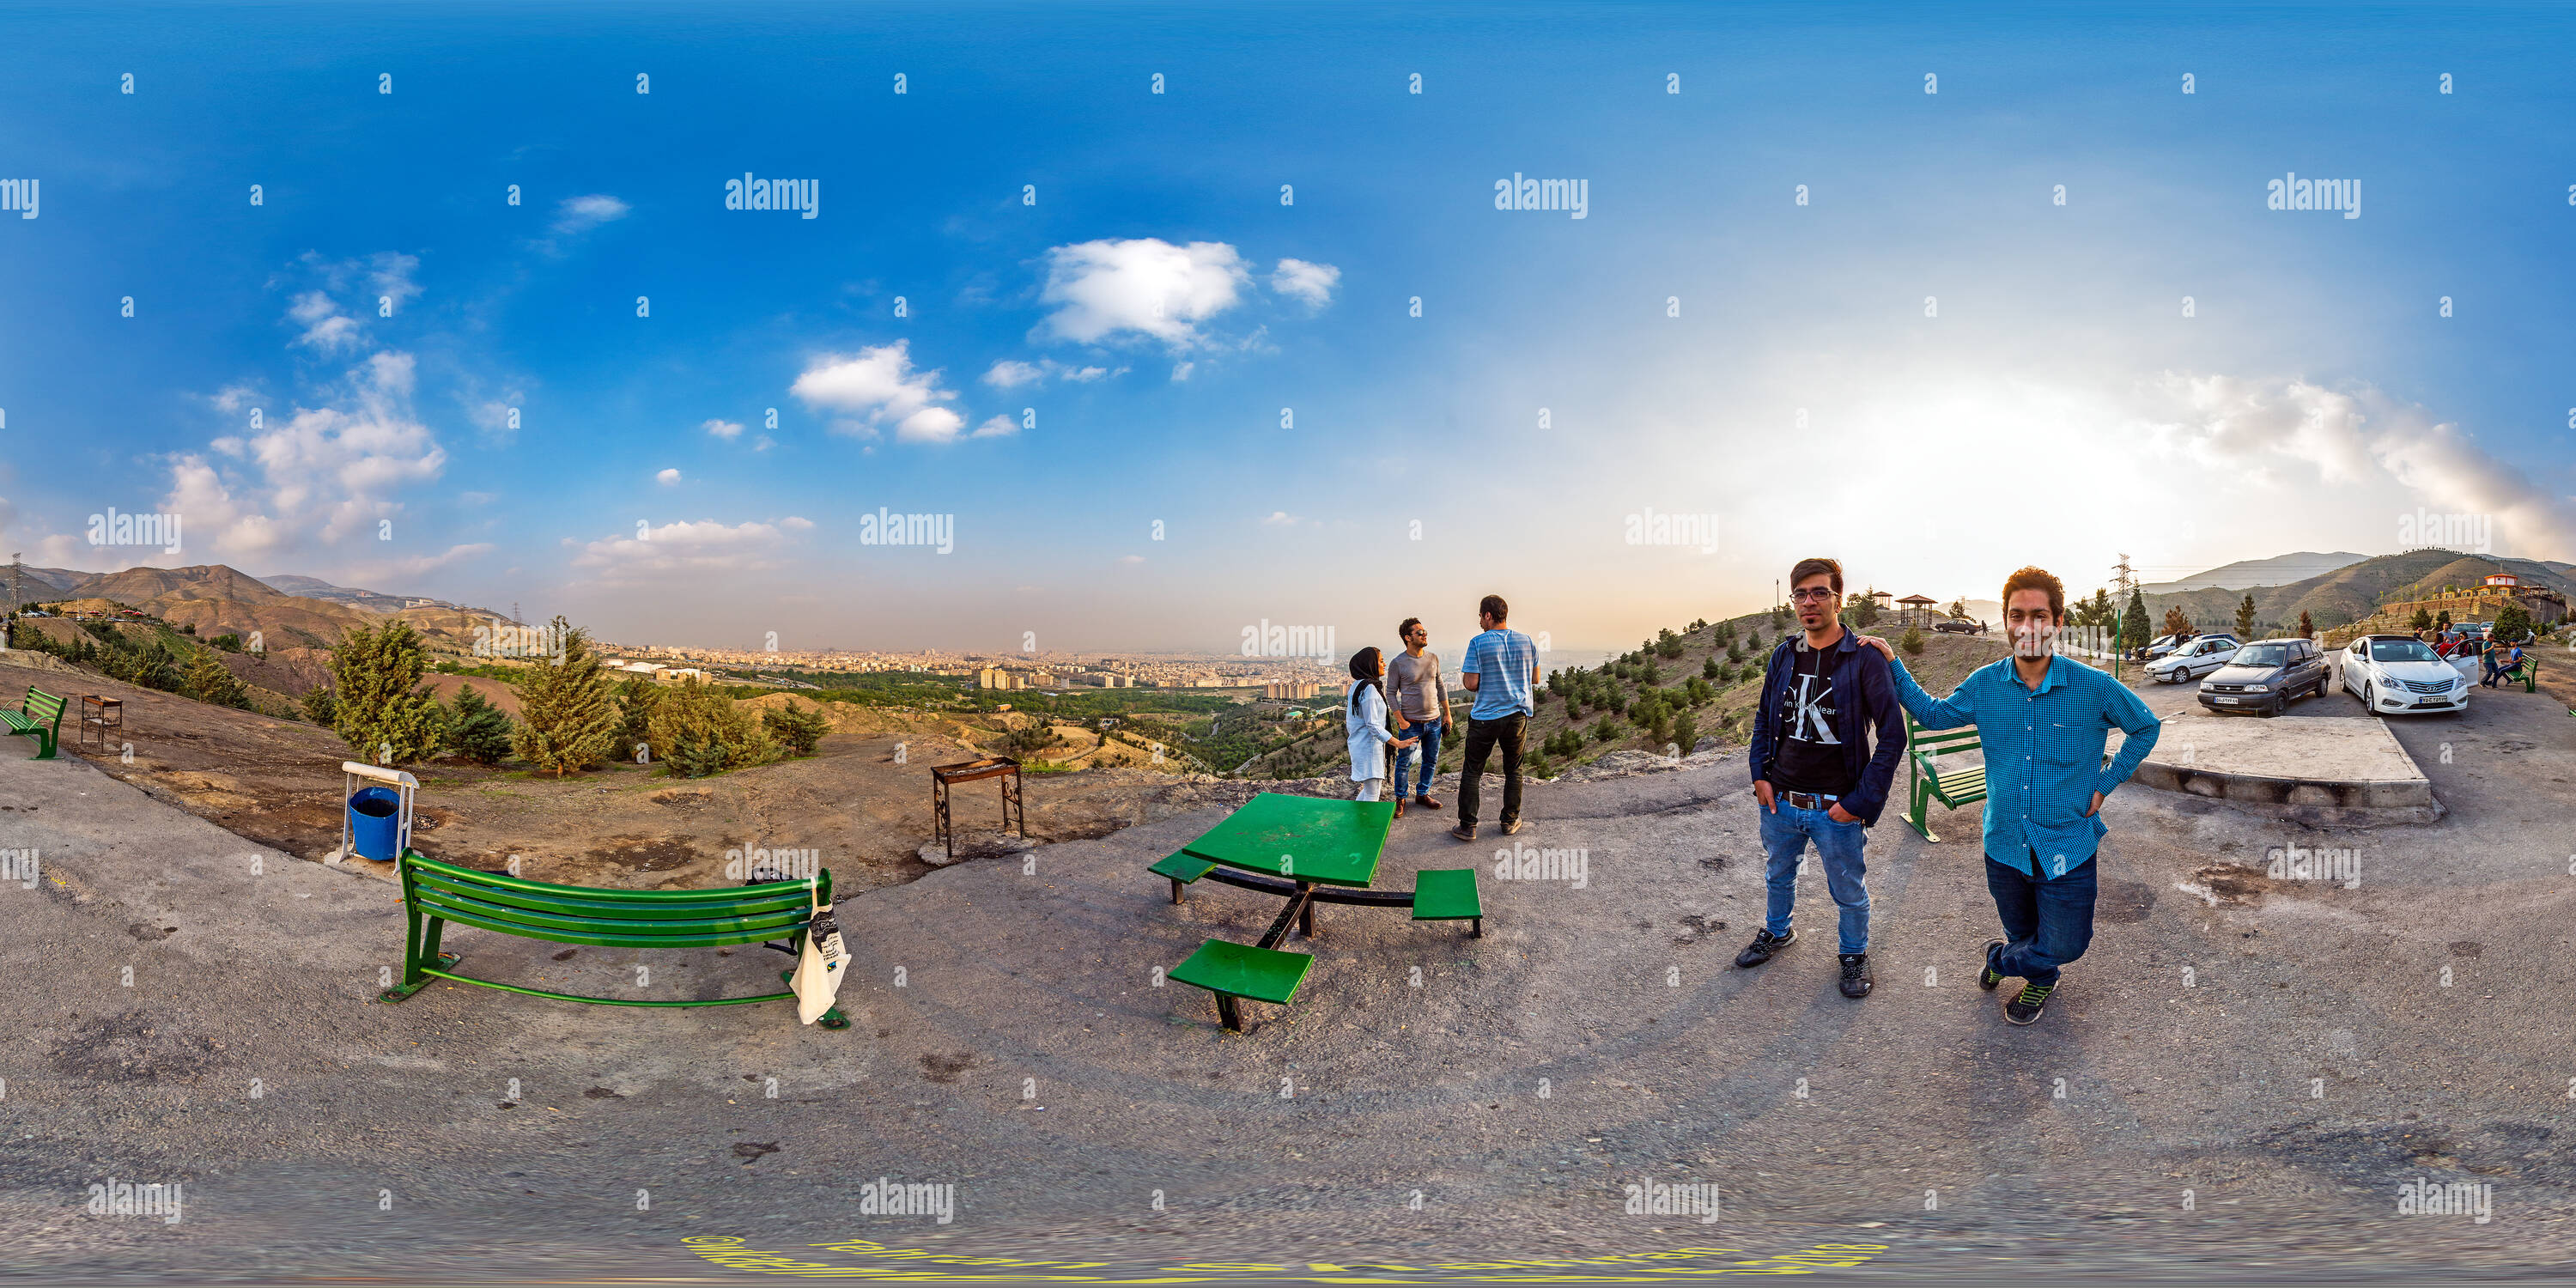 360 degree panoramic view of Tehran Shahran in the foothills of the Alborz mountains